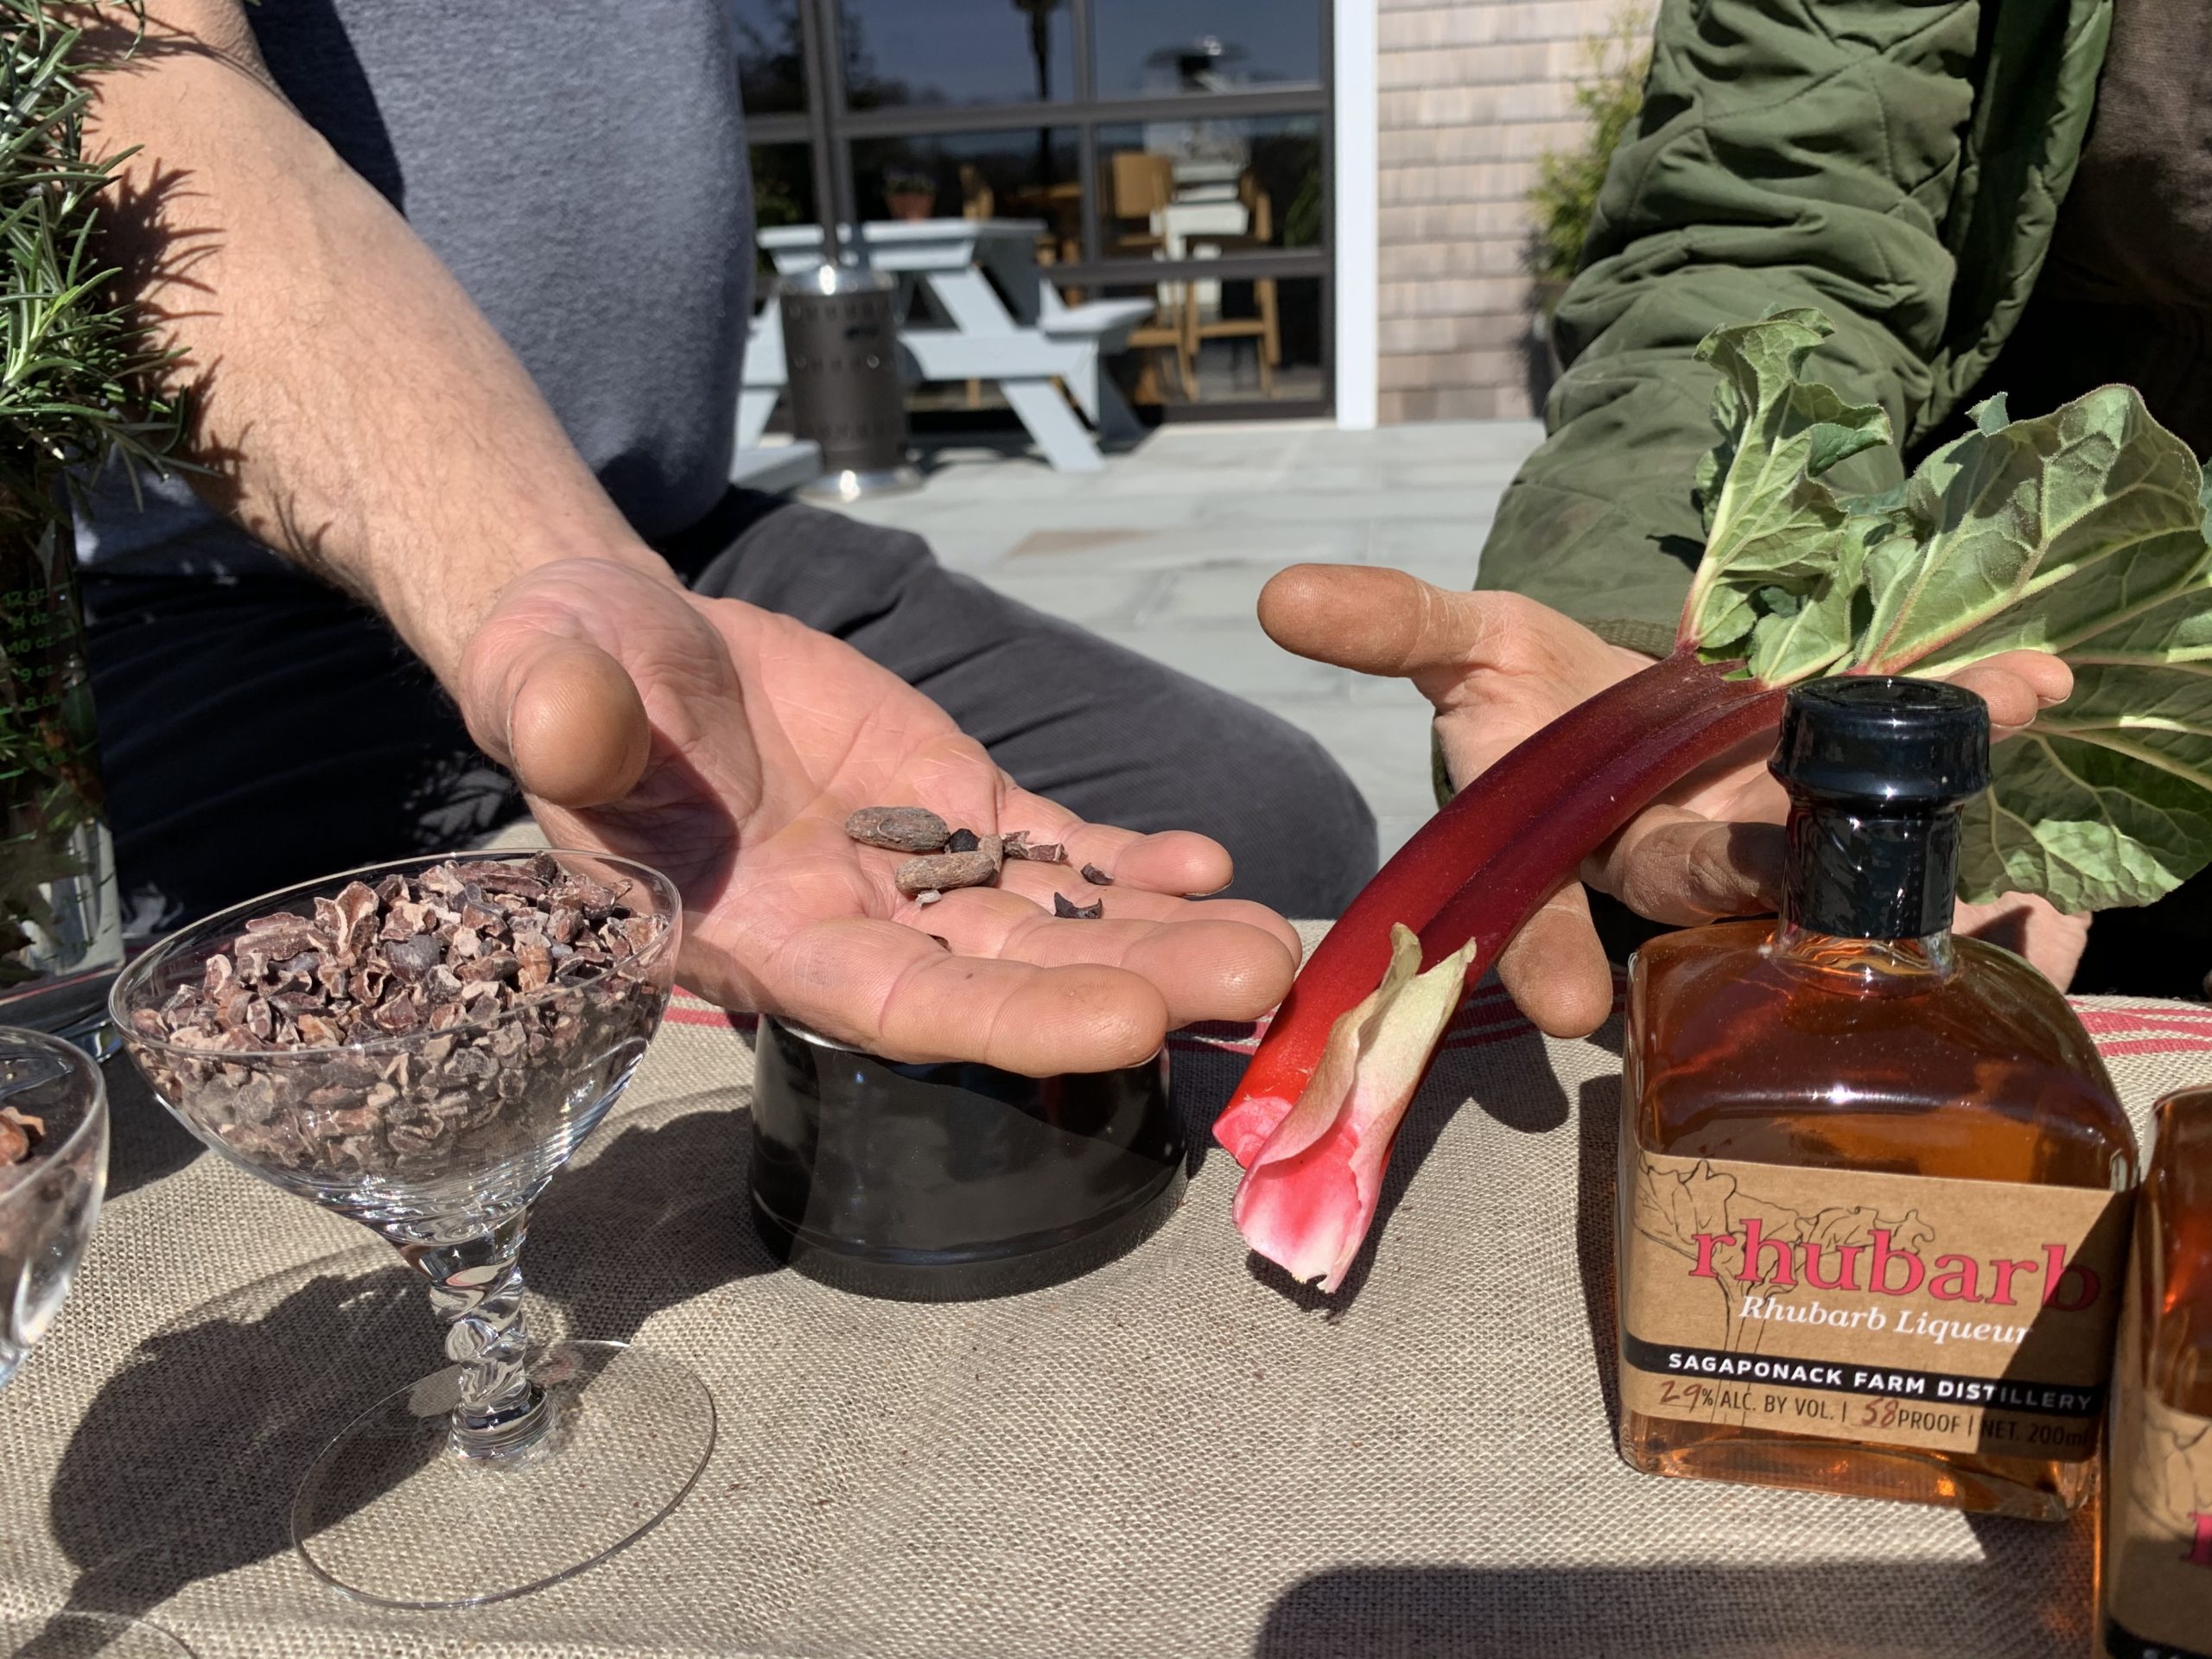 Chef Steven Amaral and Marilee Foster hold ingredients at  Sagaponack Farm Distillery for their new chocolate bars — the “Whiskey Bar